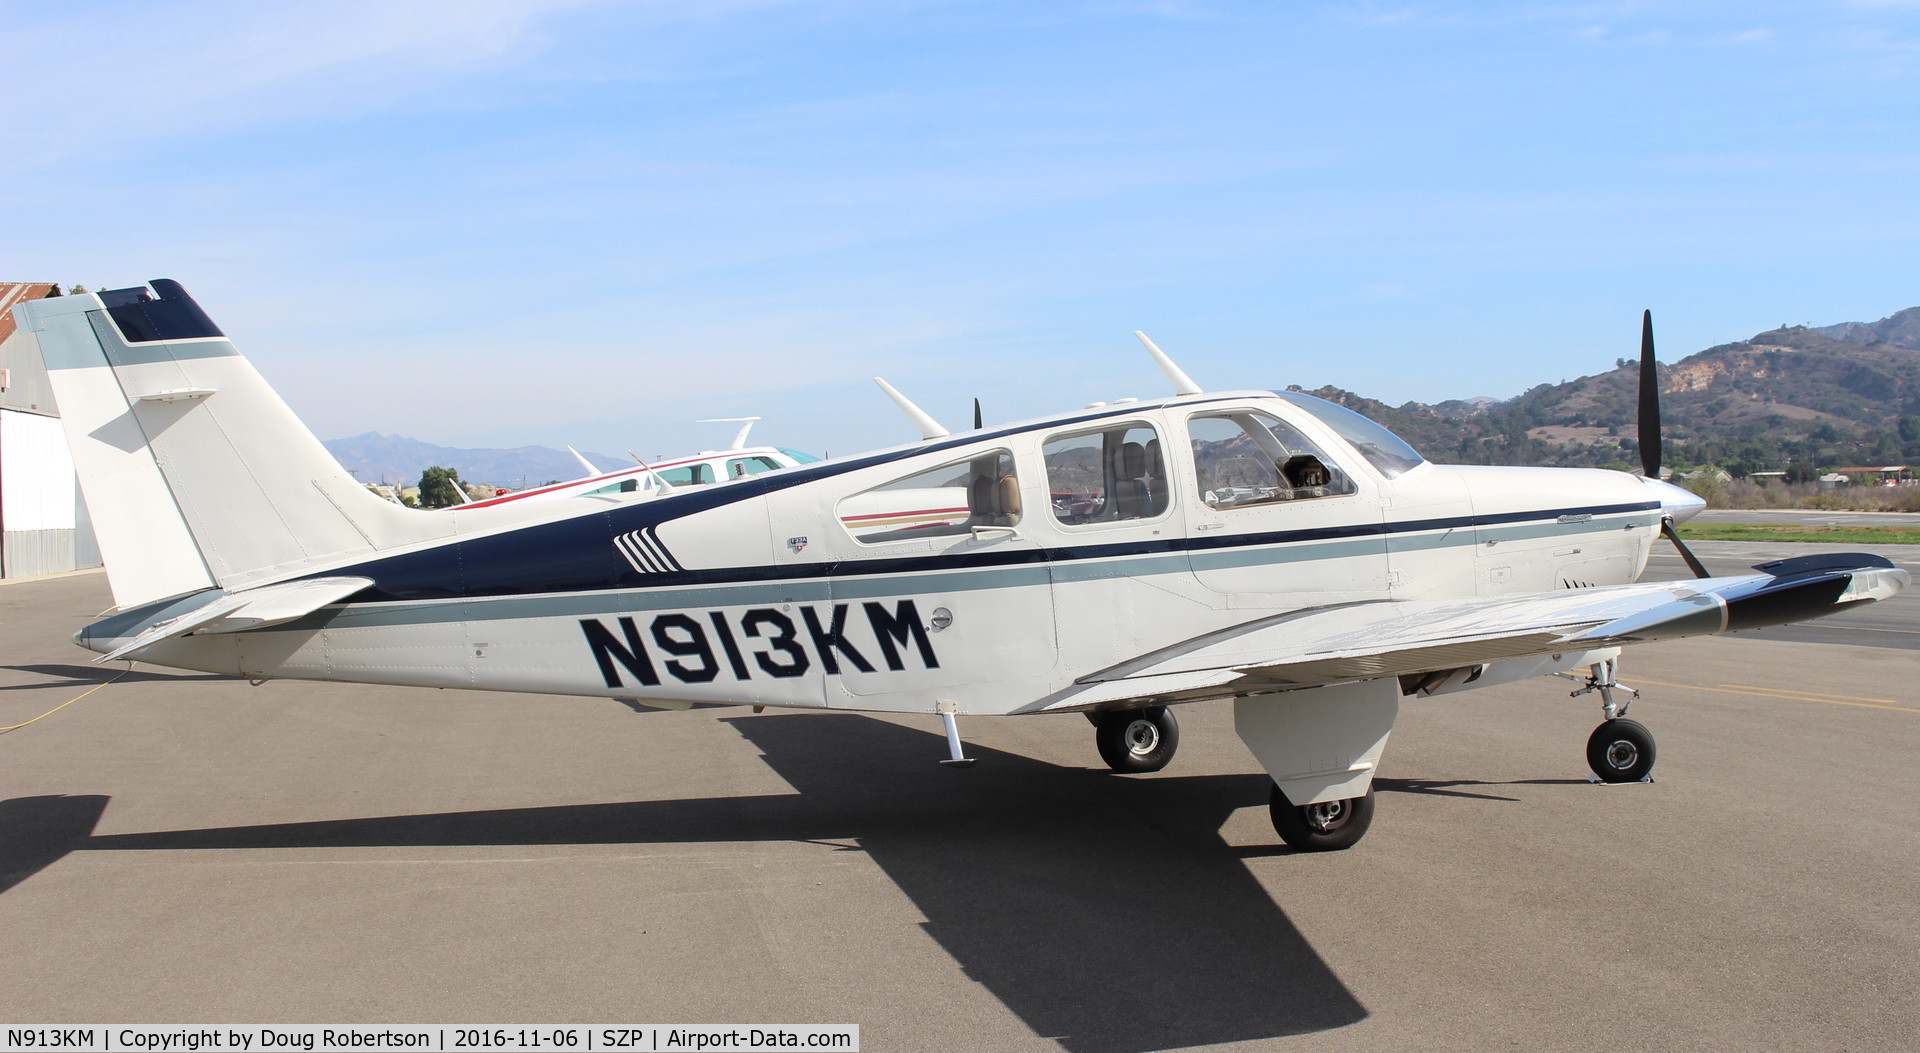 N913KM, 1979 Beech F33A Bonanza C/N CE-892, 1979 Beech F33A BONANZA, Continental IO-520 285 Hp, long cabin version-only 34 produced. Six seats & larger baggage door. Max speed at sea level-208 mph.